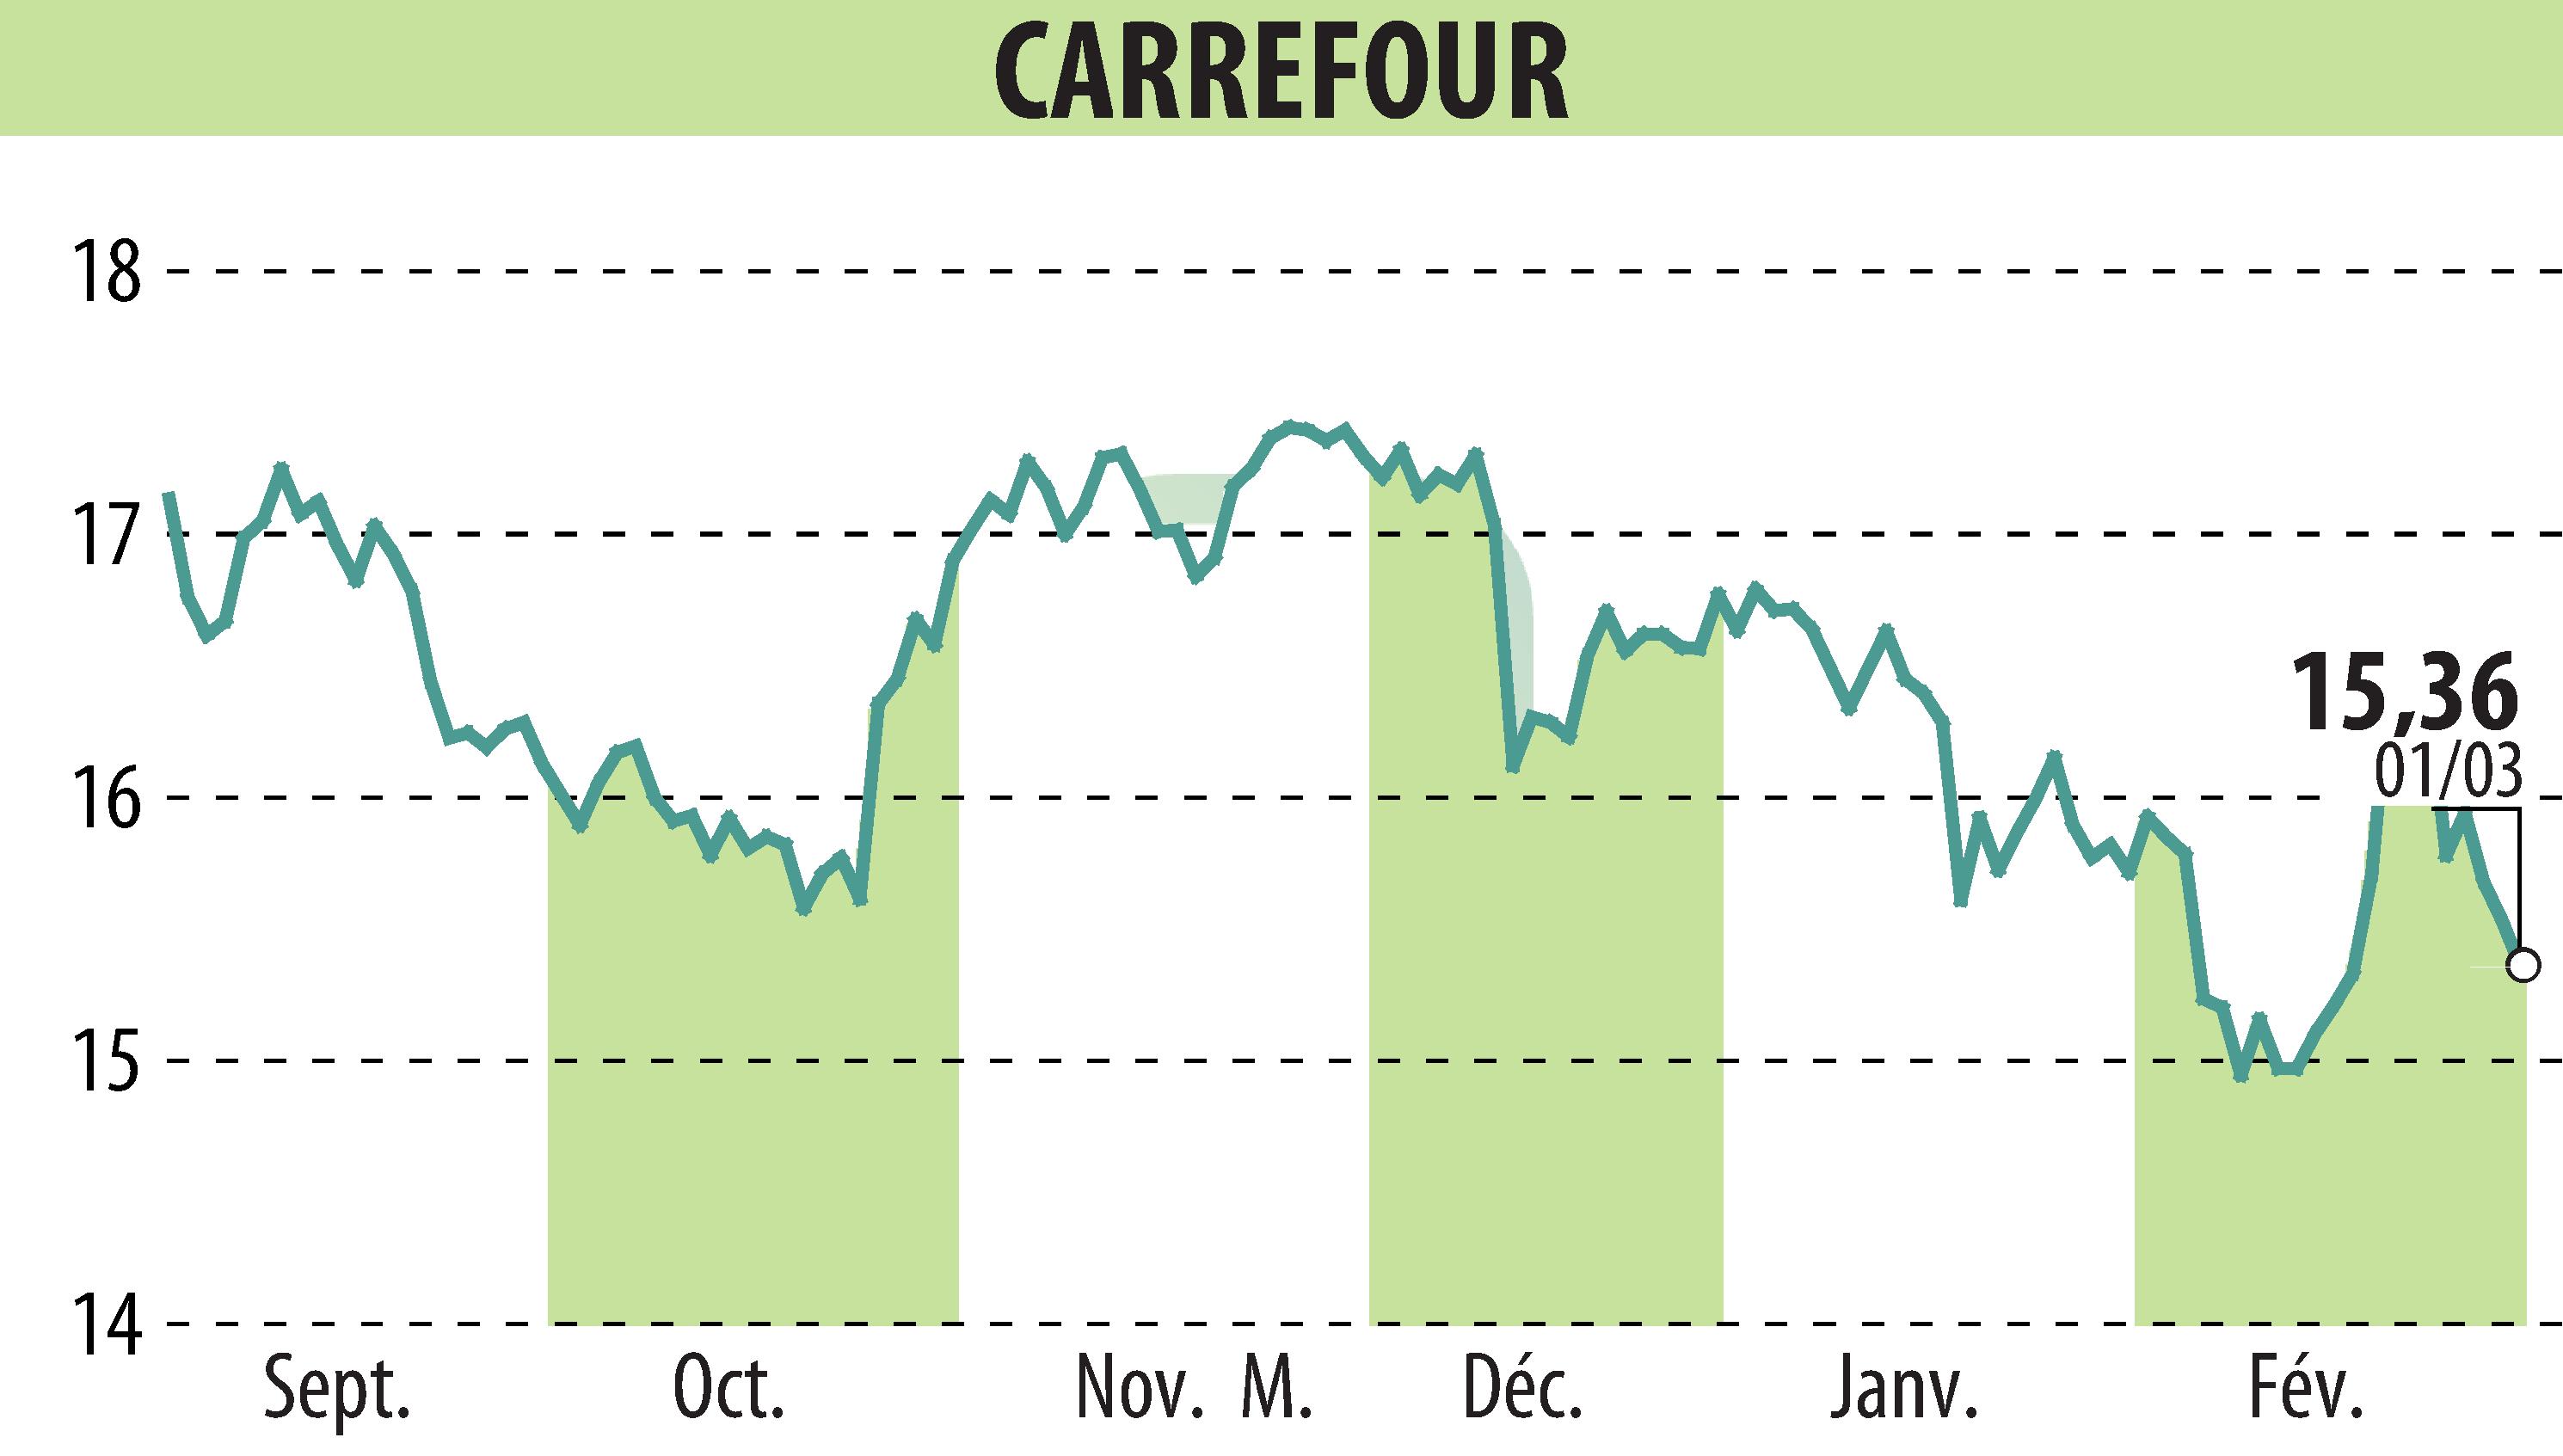 Stock price chart of CARREFOUR (EPA:CA) showing fluctuations